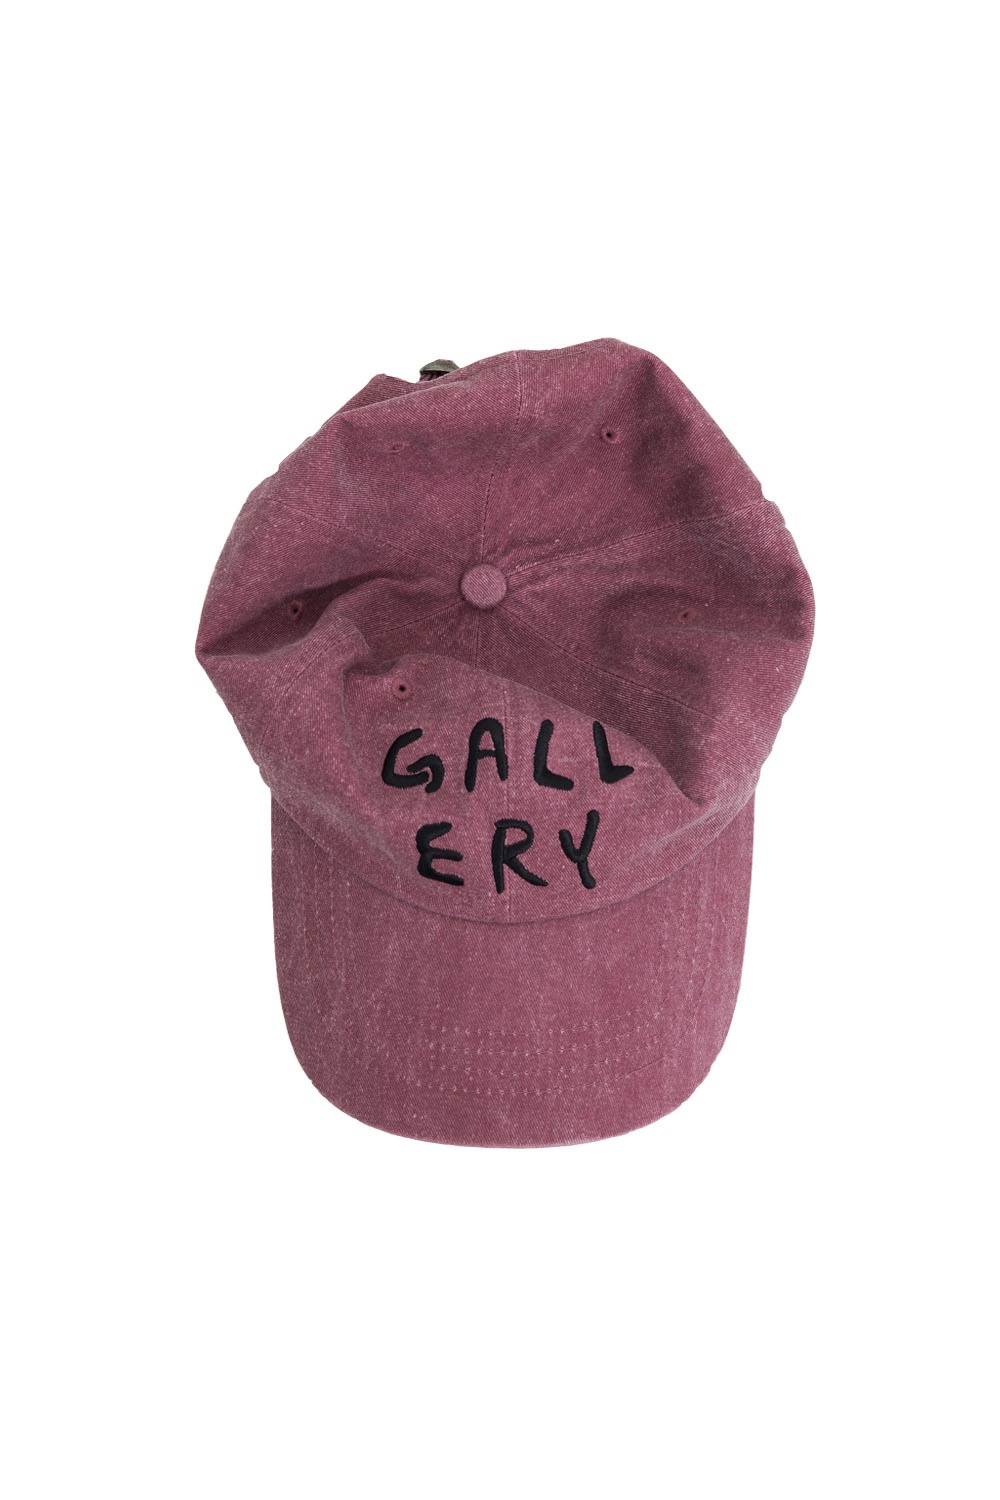 Gallery Pigment Ball Cap - Washed Purple